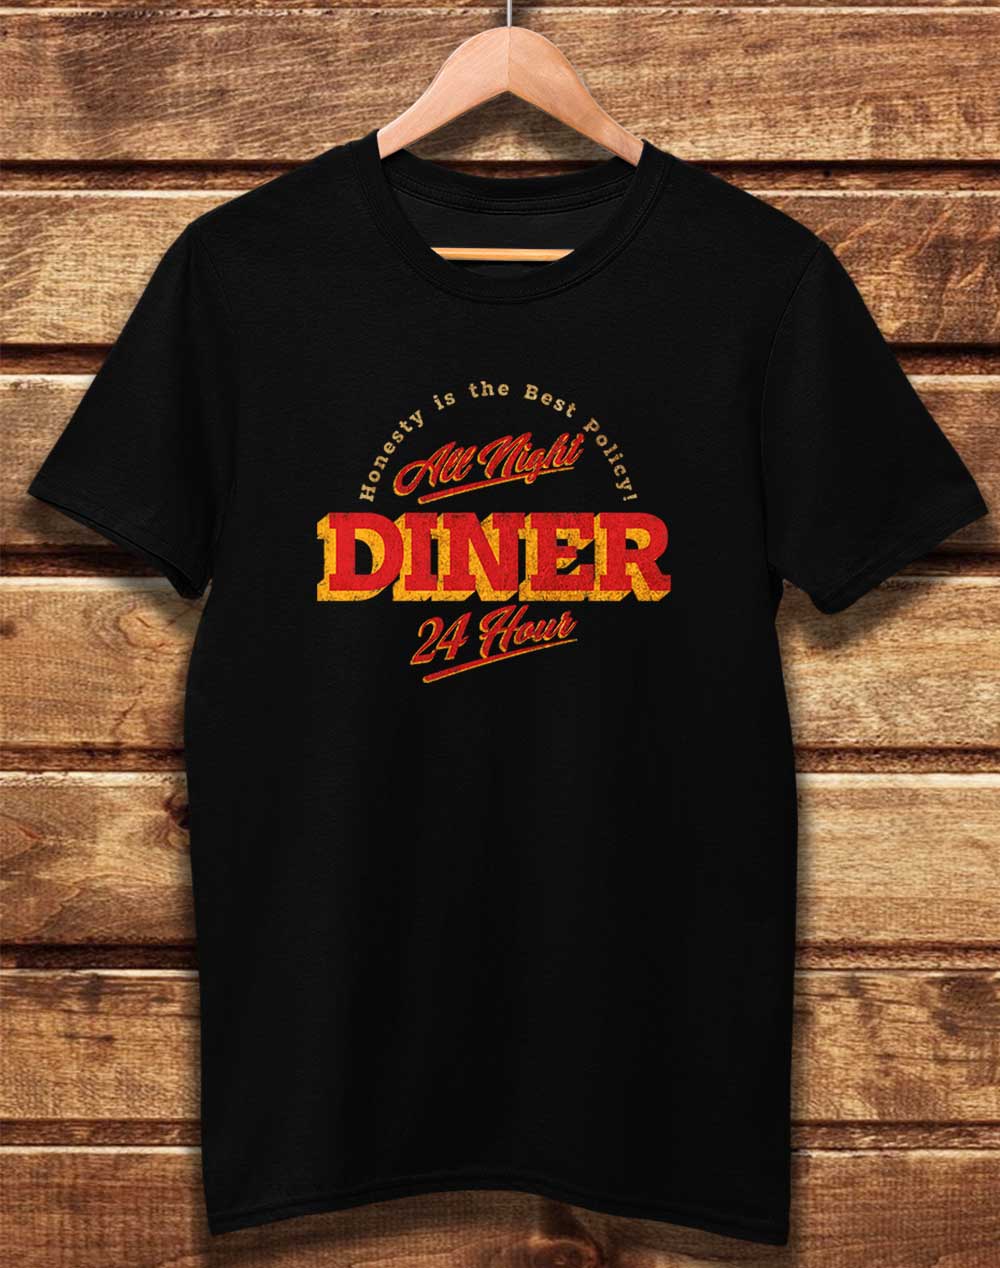 Black - DELUXE 24 Hour Diner Organic Cotton T-Shirt